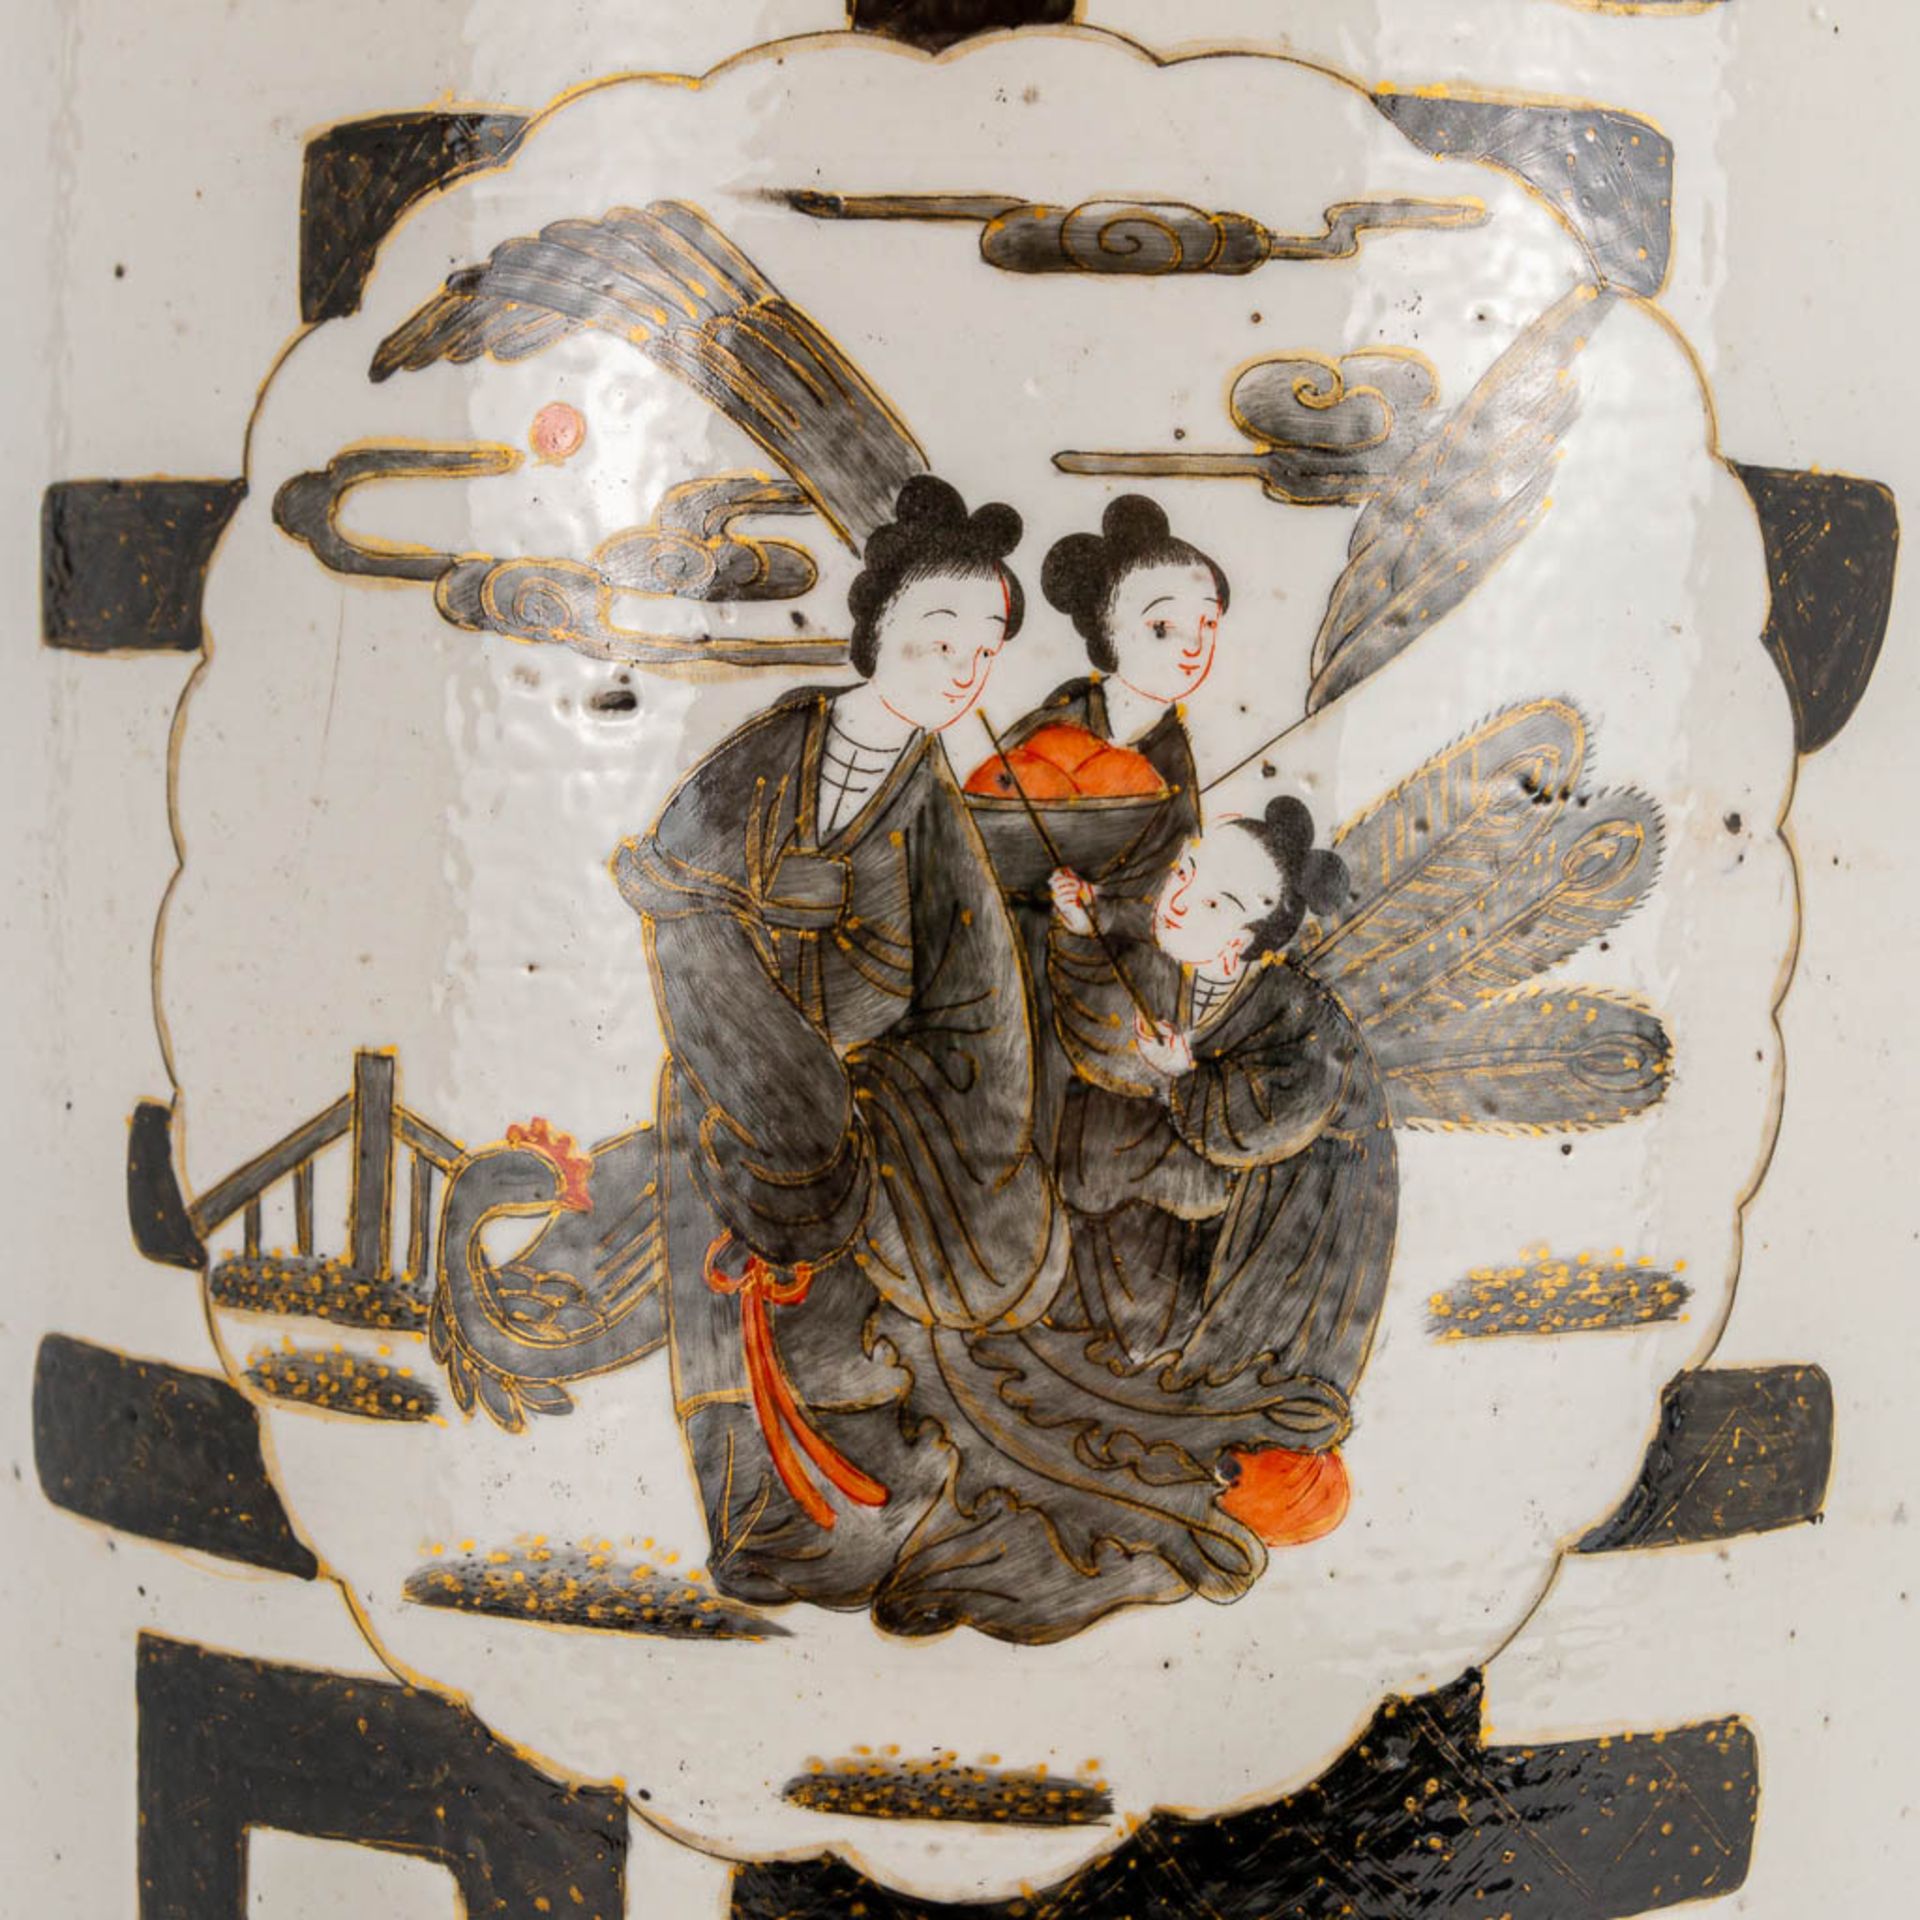 A Chinese vase with decor of wise men and calligraphic texts. 19th/20th century. (54 x 21 cm) - Image 19 of 21